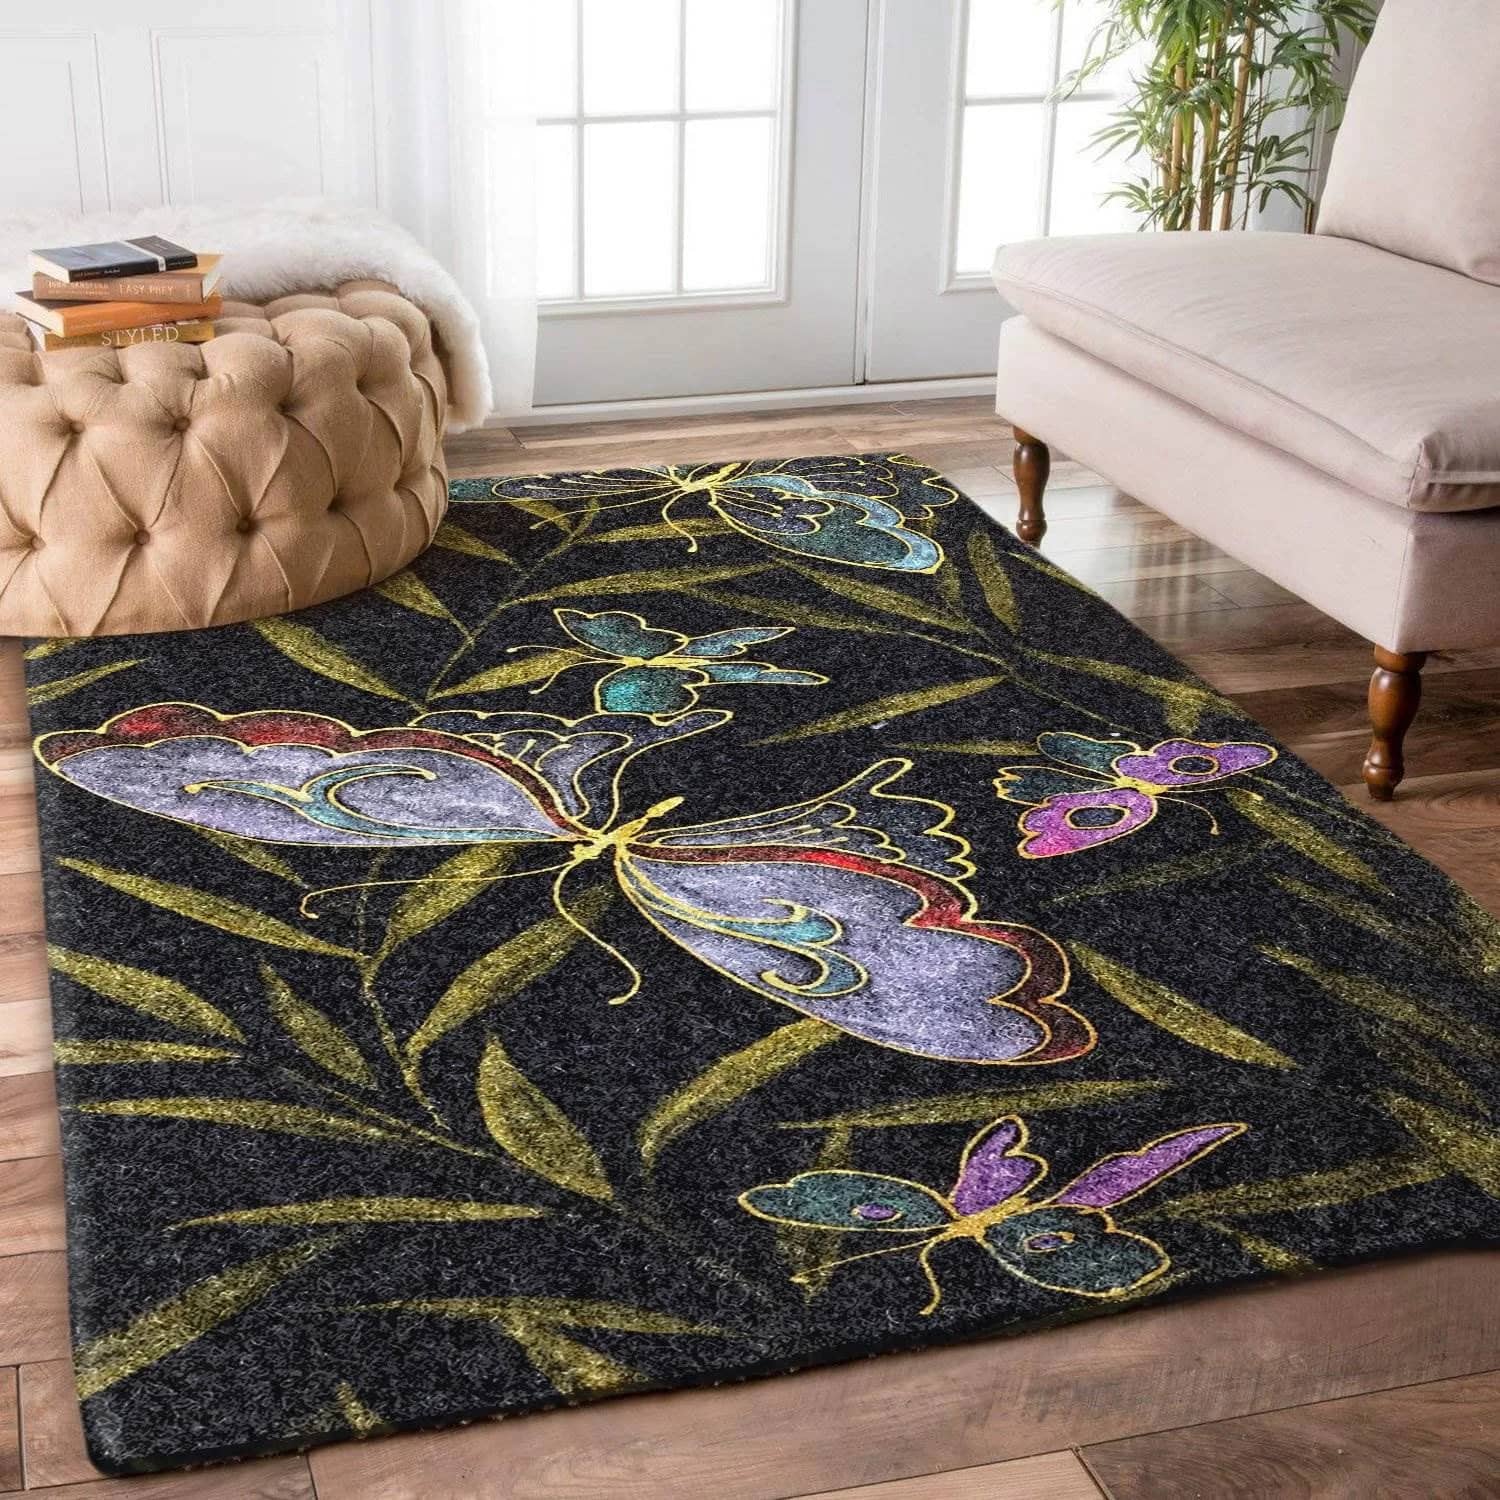 Butterfly Limited Edition Amazon Best Seller Sku 262542 Rug